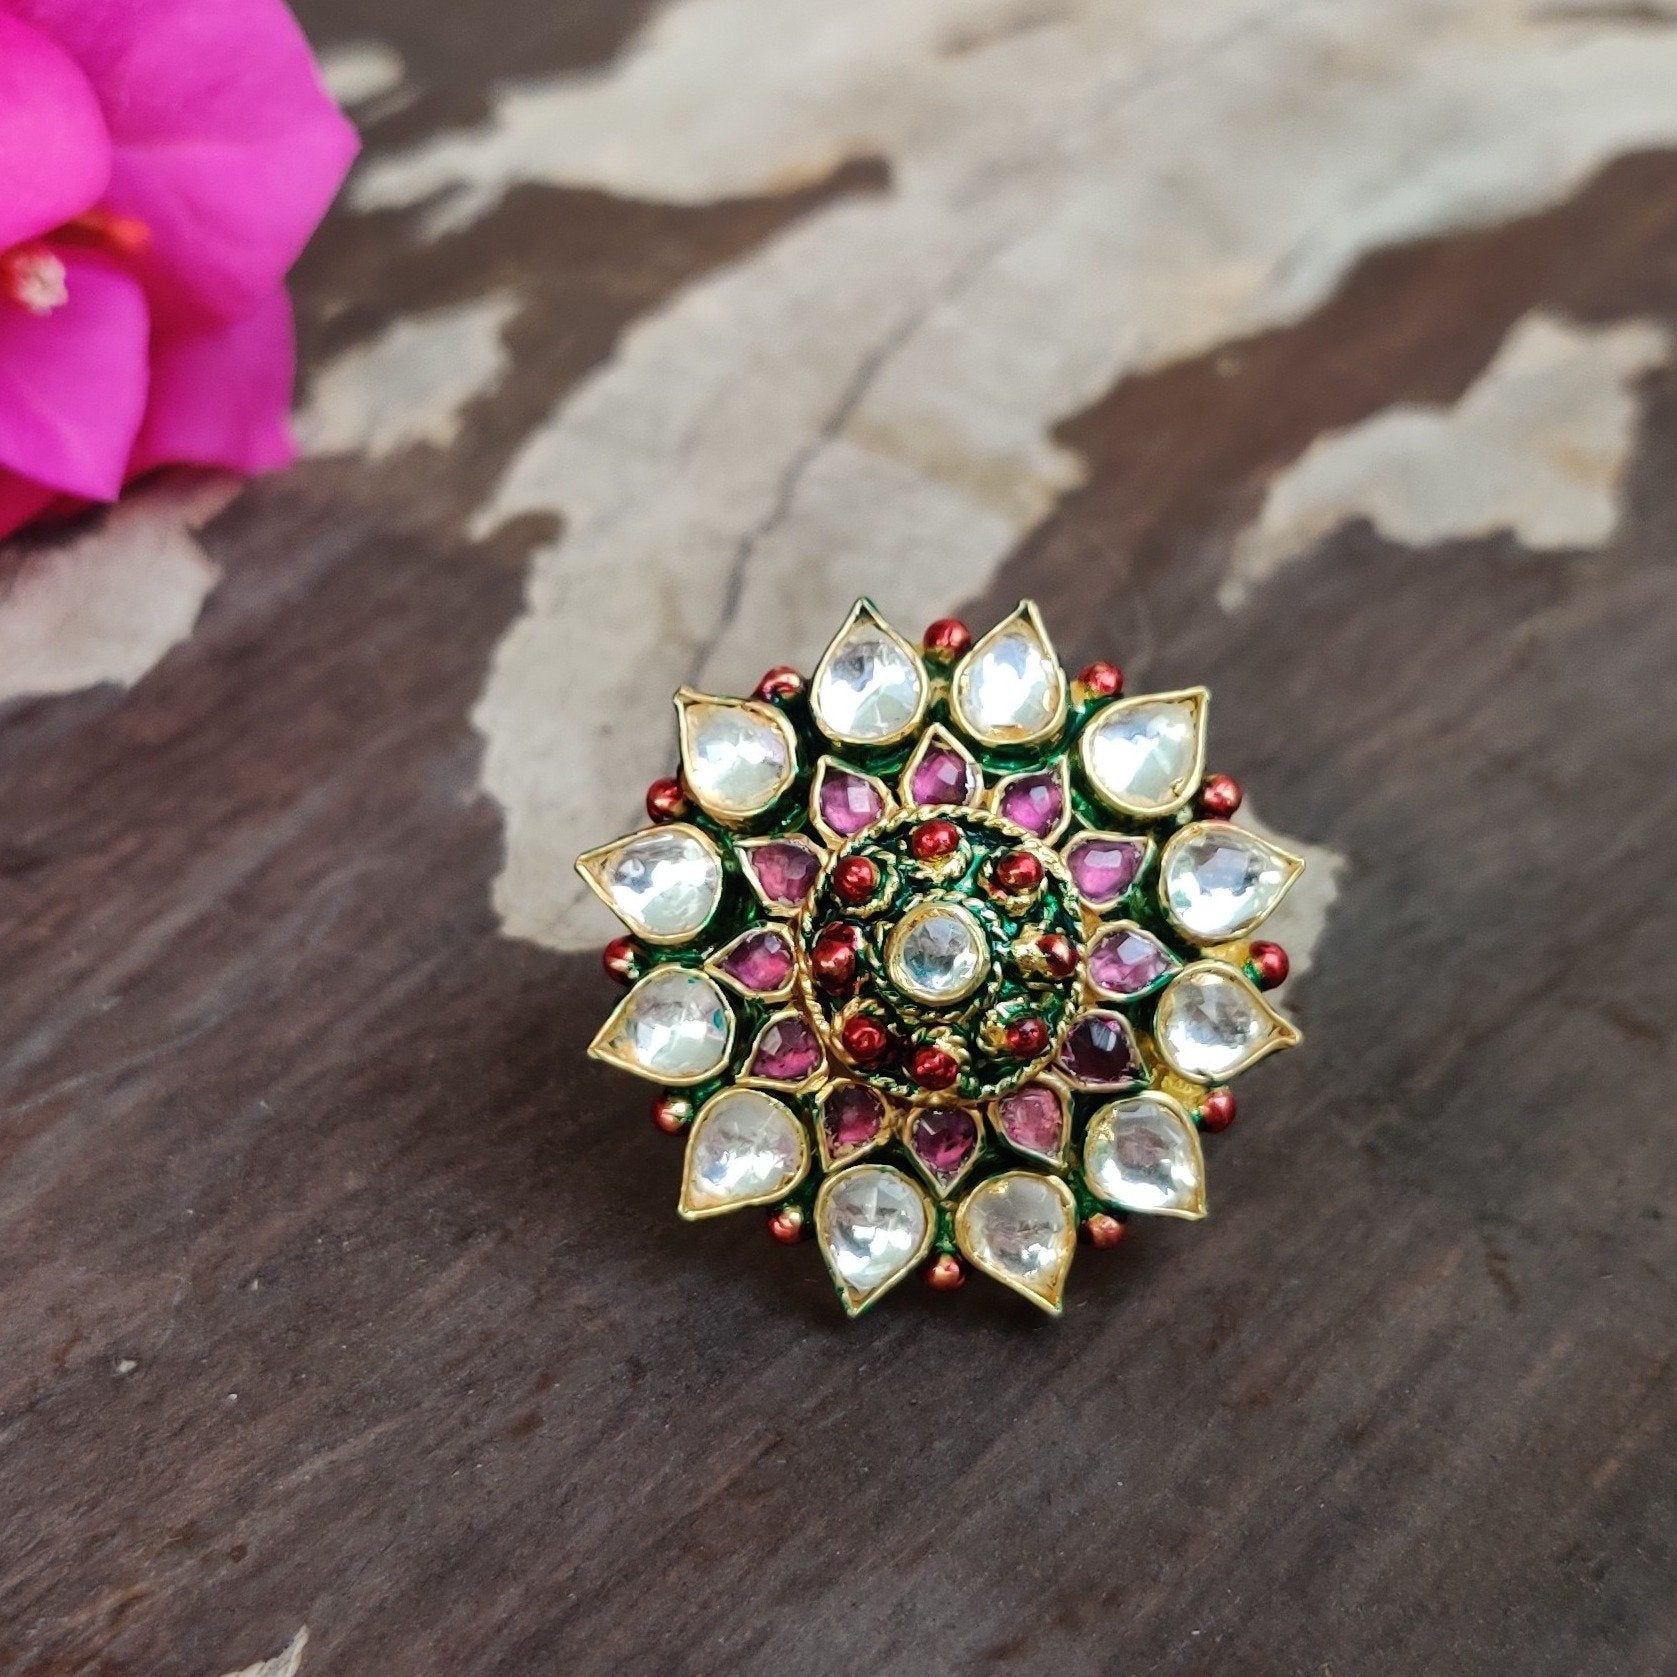 Dropship Fashion Ring Jewelry Red Stone Flower Design Rings For Women  Bridal Wedding Accessories to Sell Online at a Lower Price